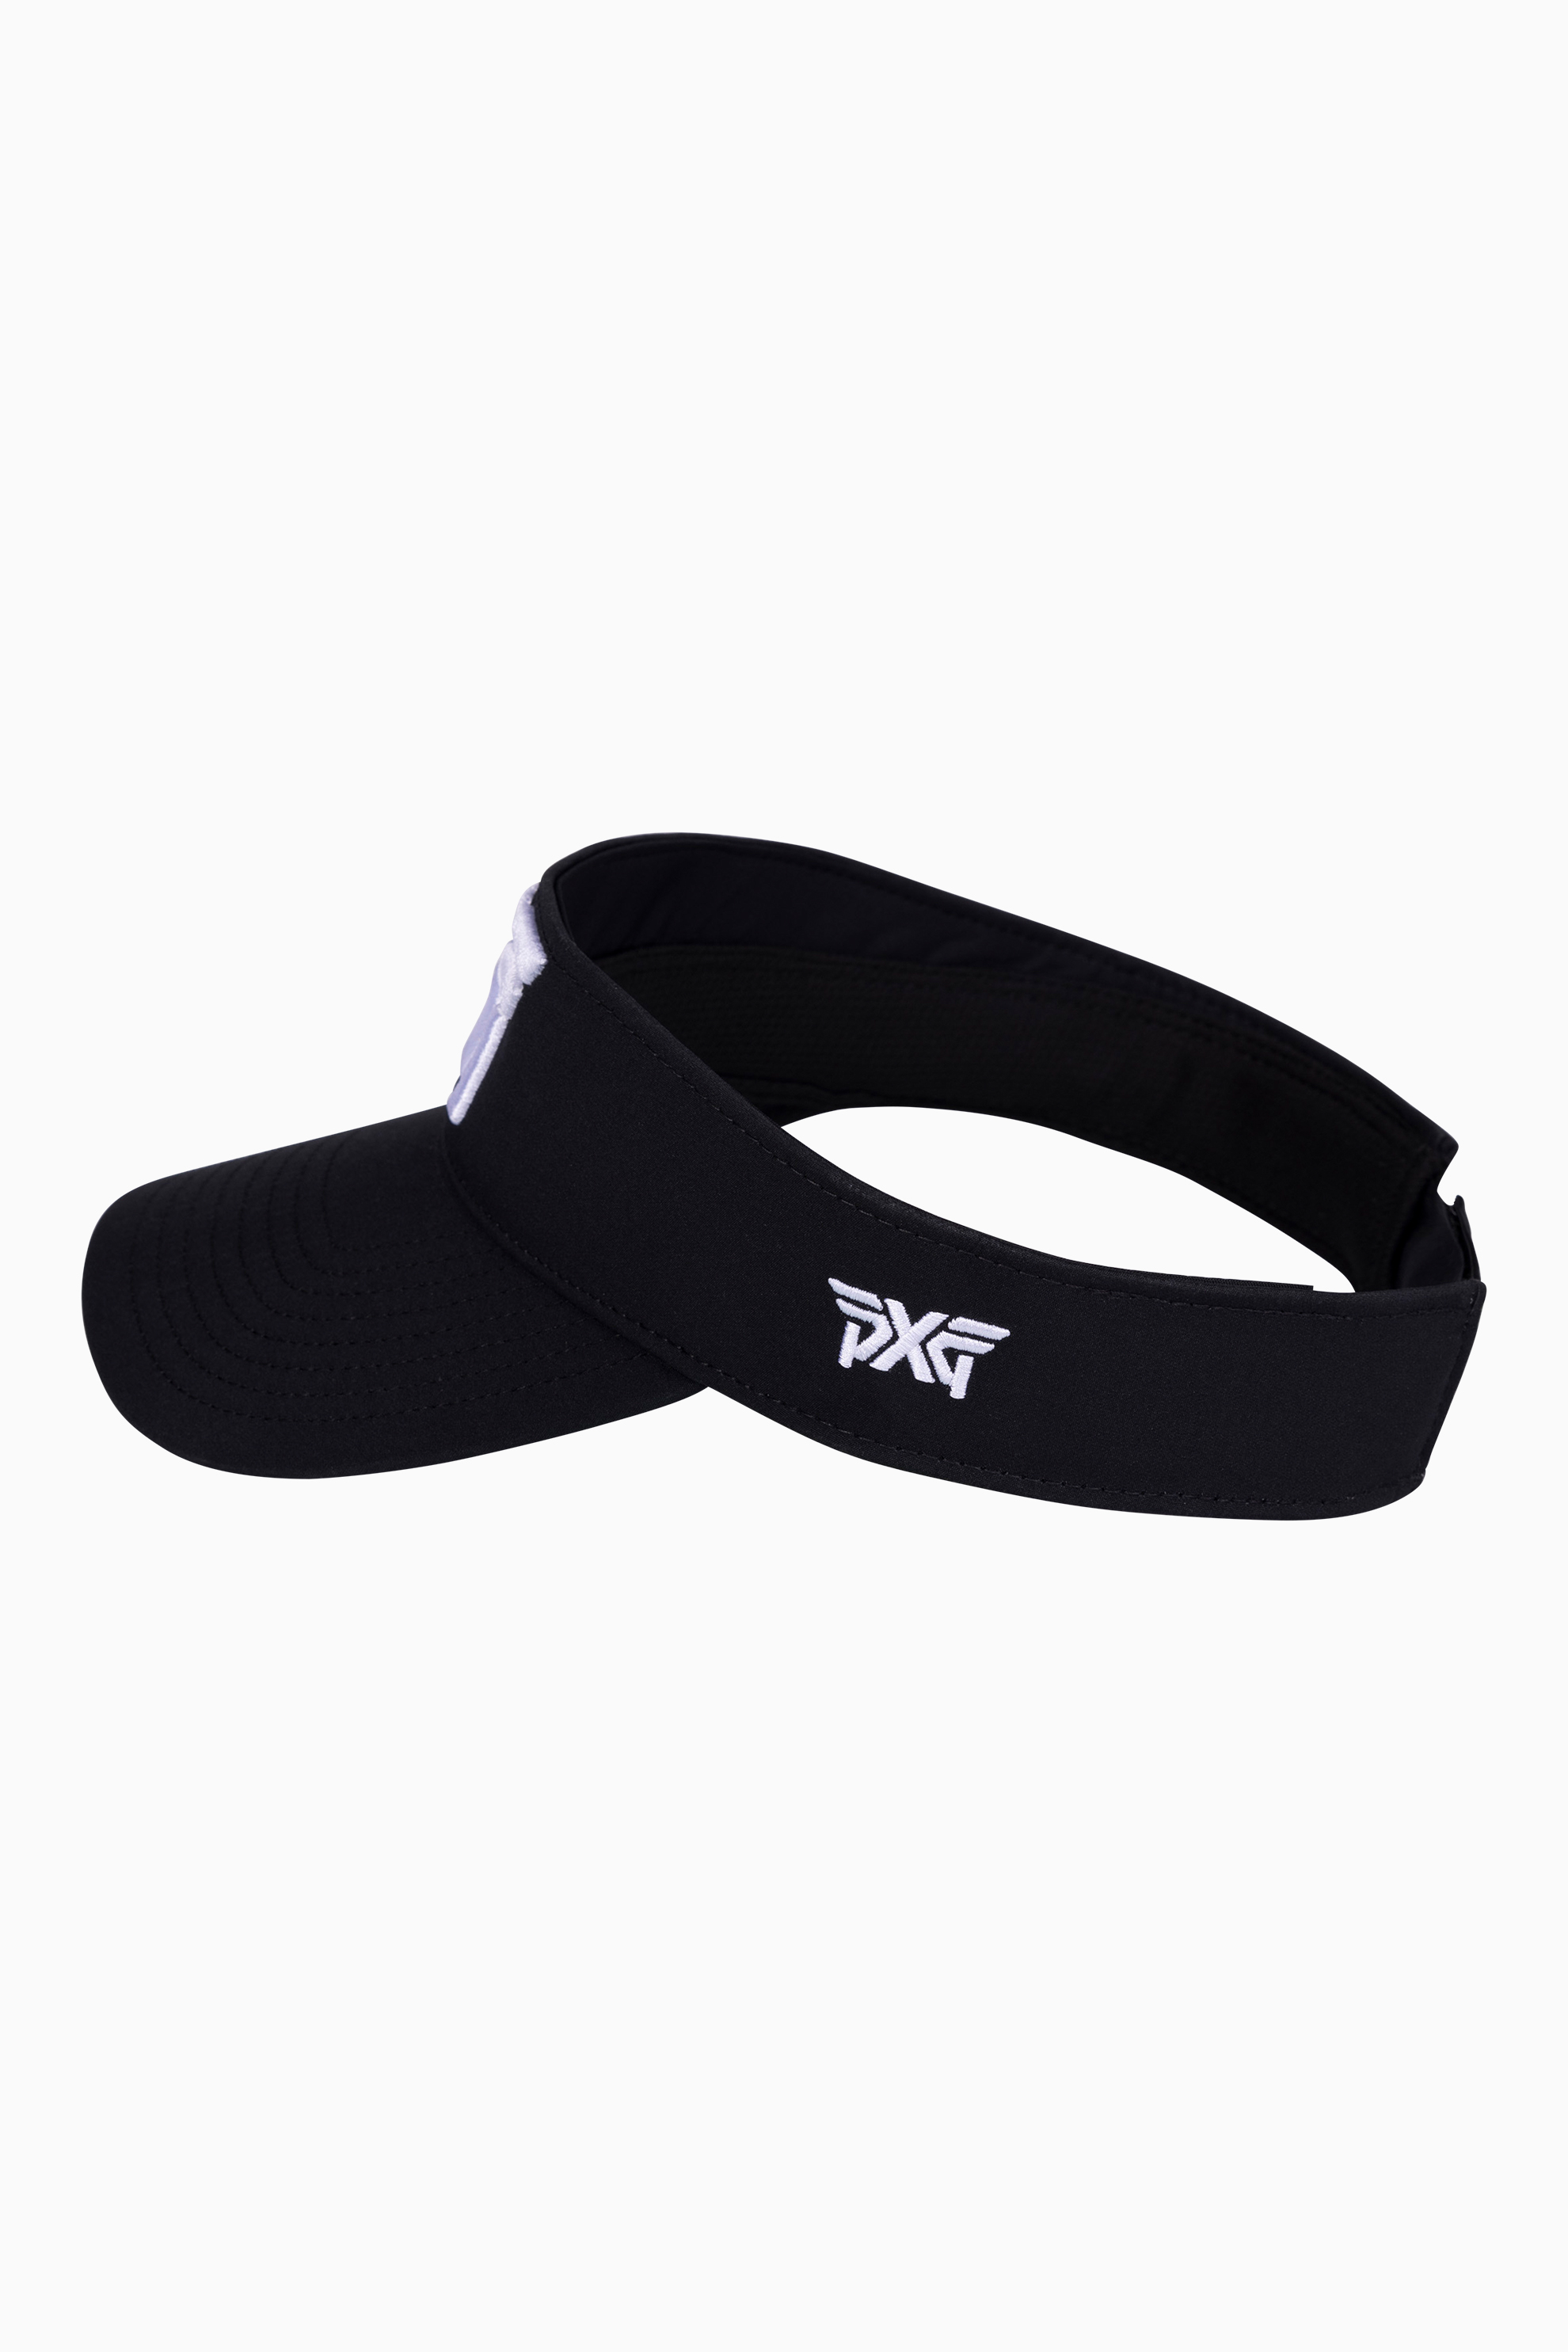 Sport Visor | Apparel, PXG Gear, Quality at Accessories Highest Clubs the and Shop Golf Golf